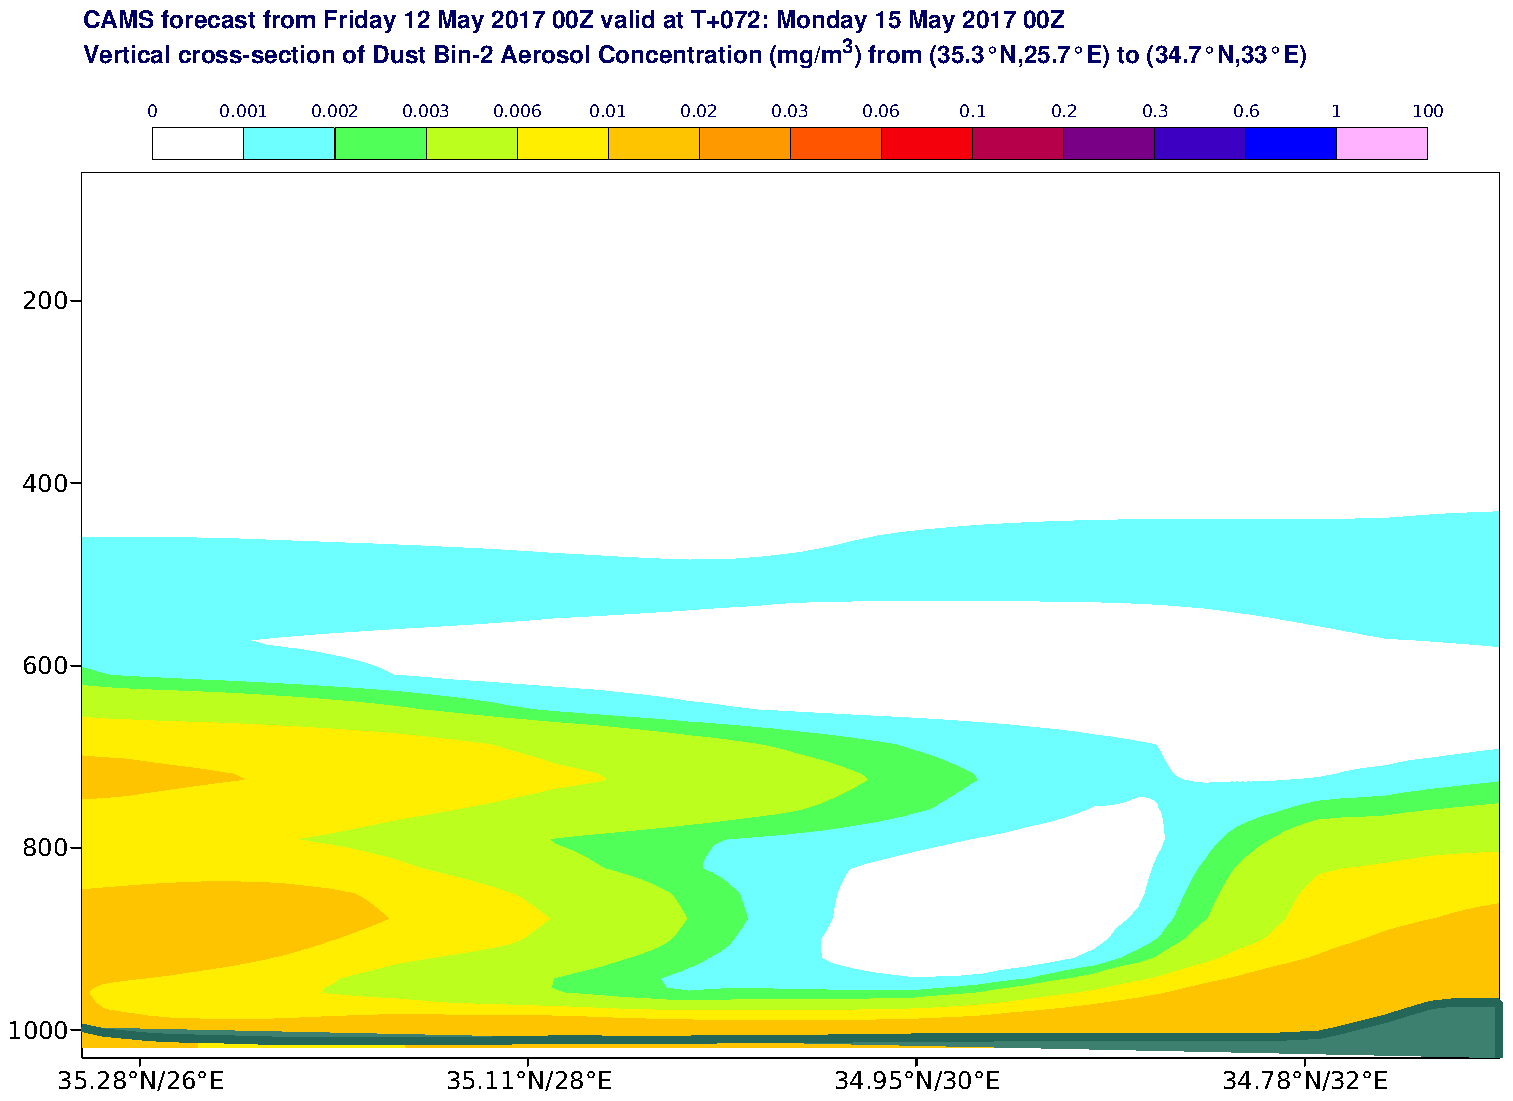 Vertical cross-section of Dust Bin-2 Aerosol Concentration (mg/m3) valid at T72 - 2017-05-15 00:00